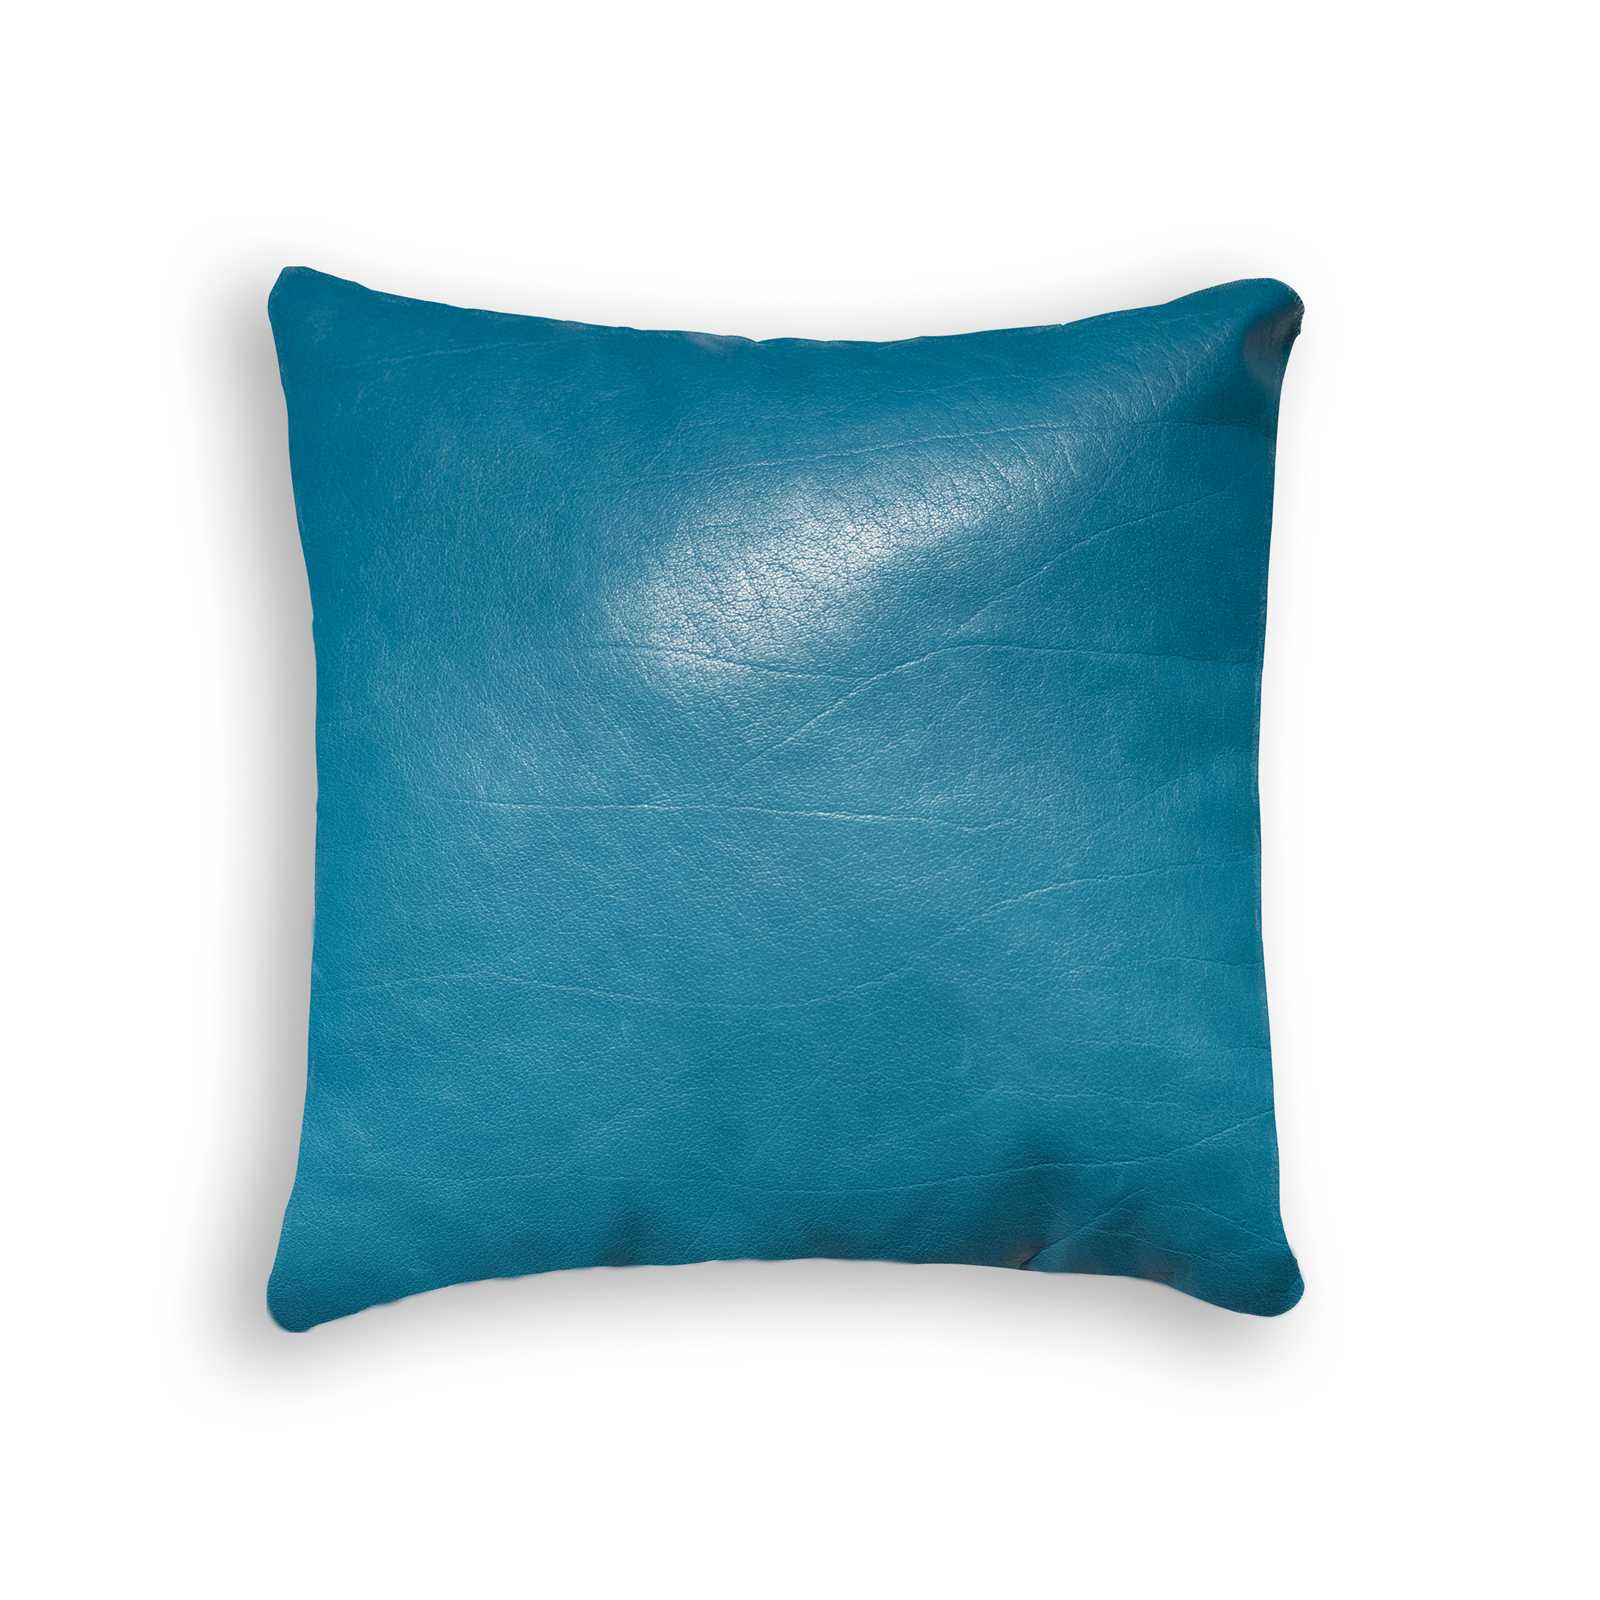 16" x 16" x 5" Turquoise, Cowhide Leather - Pillow